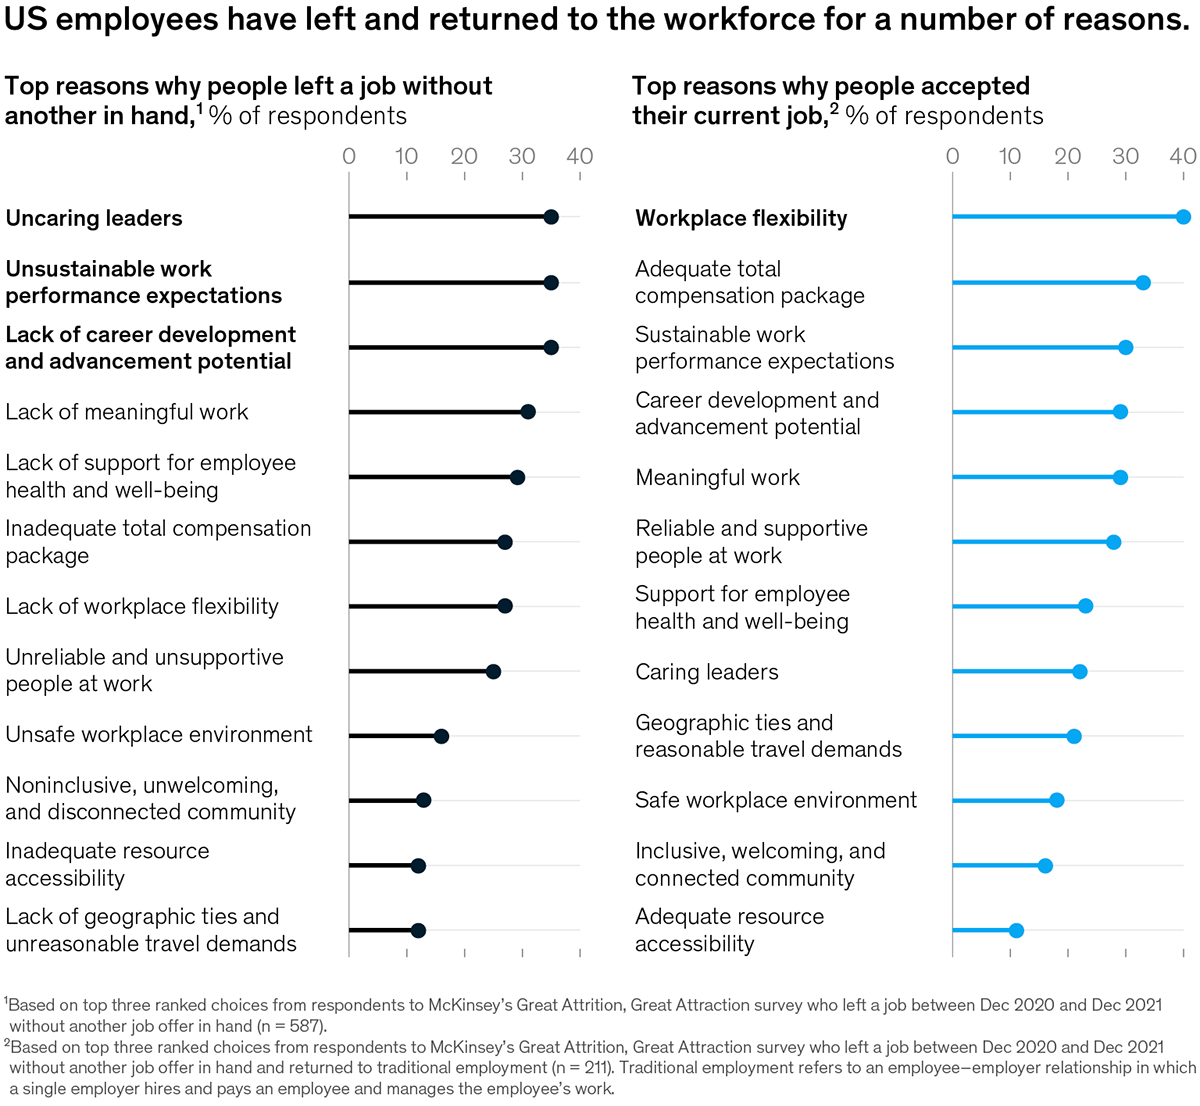 A data visualization showing the reasons why people have left the workforce and reasons why they returned